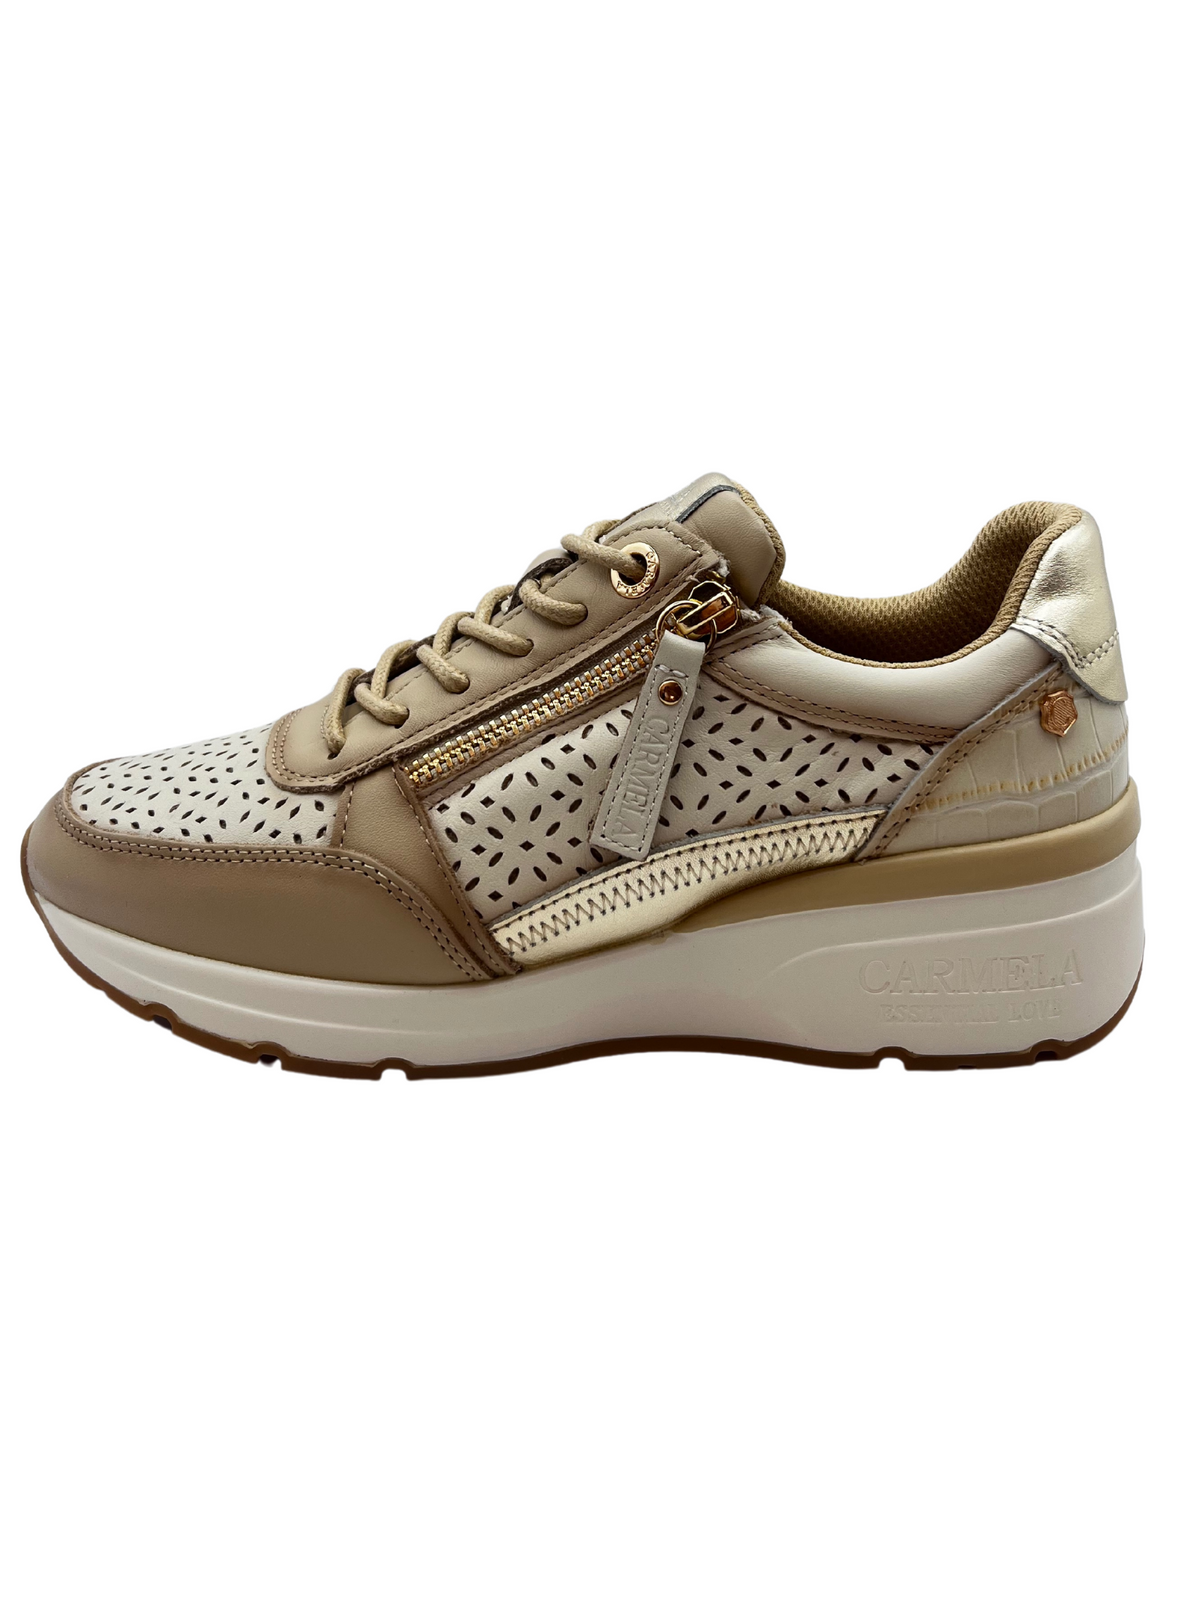 Carmela Beige and Gold Perforated Trainers With Side Zip